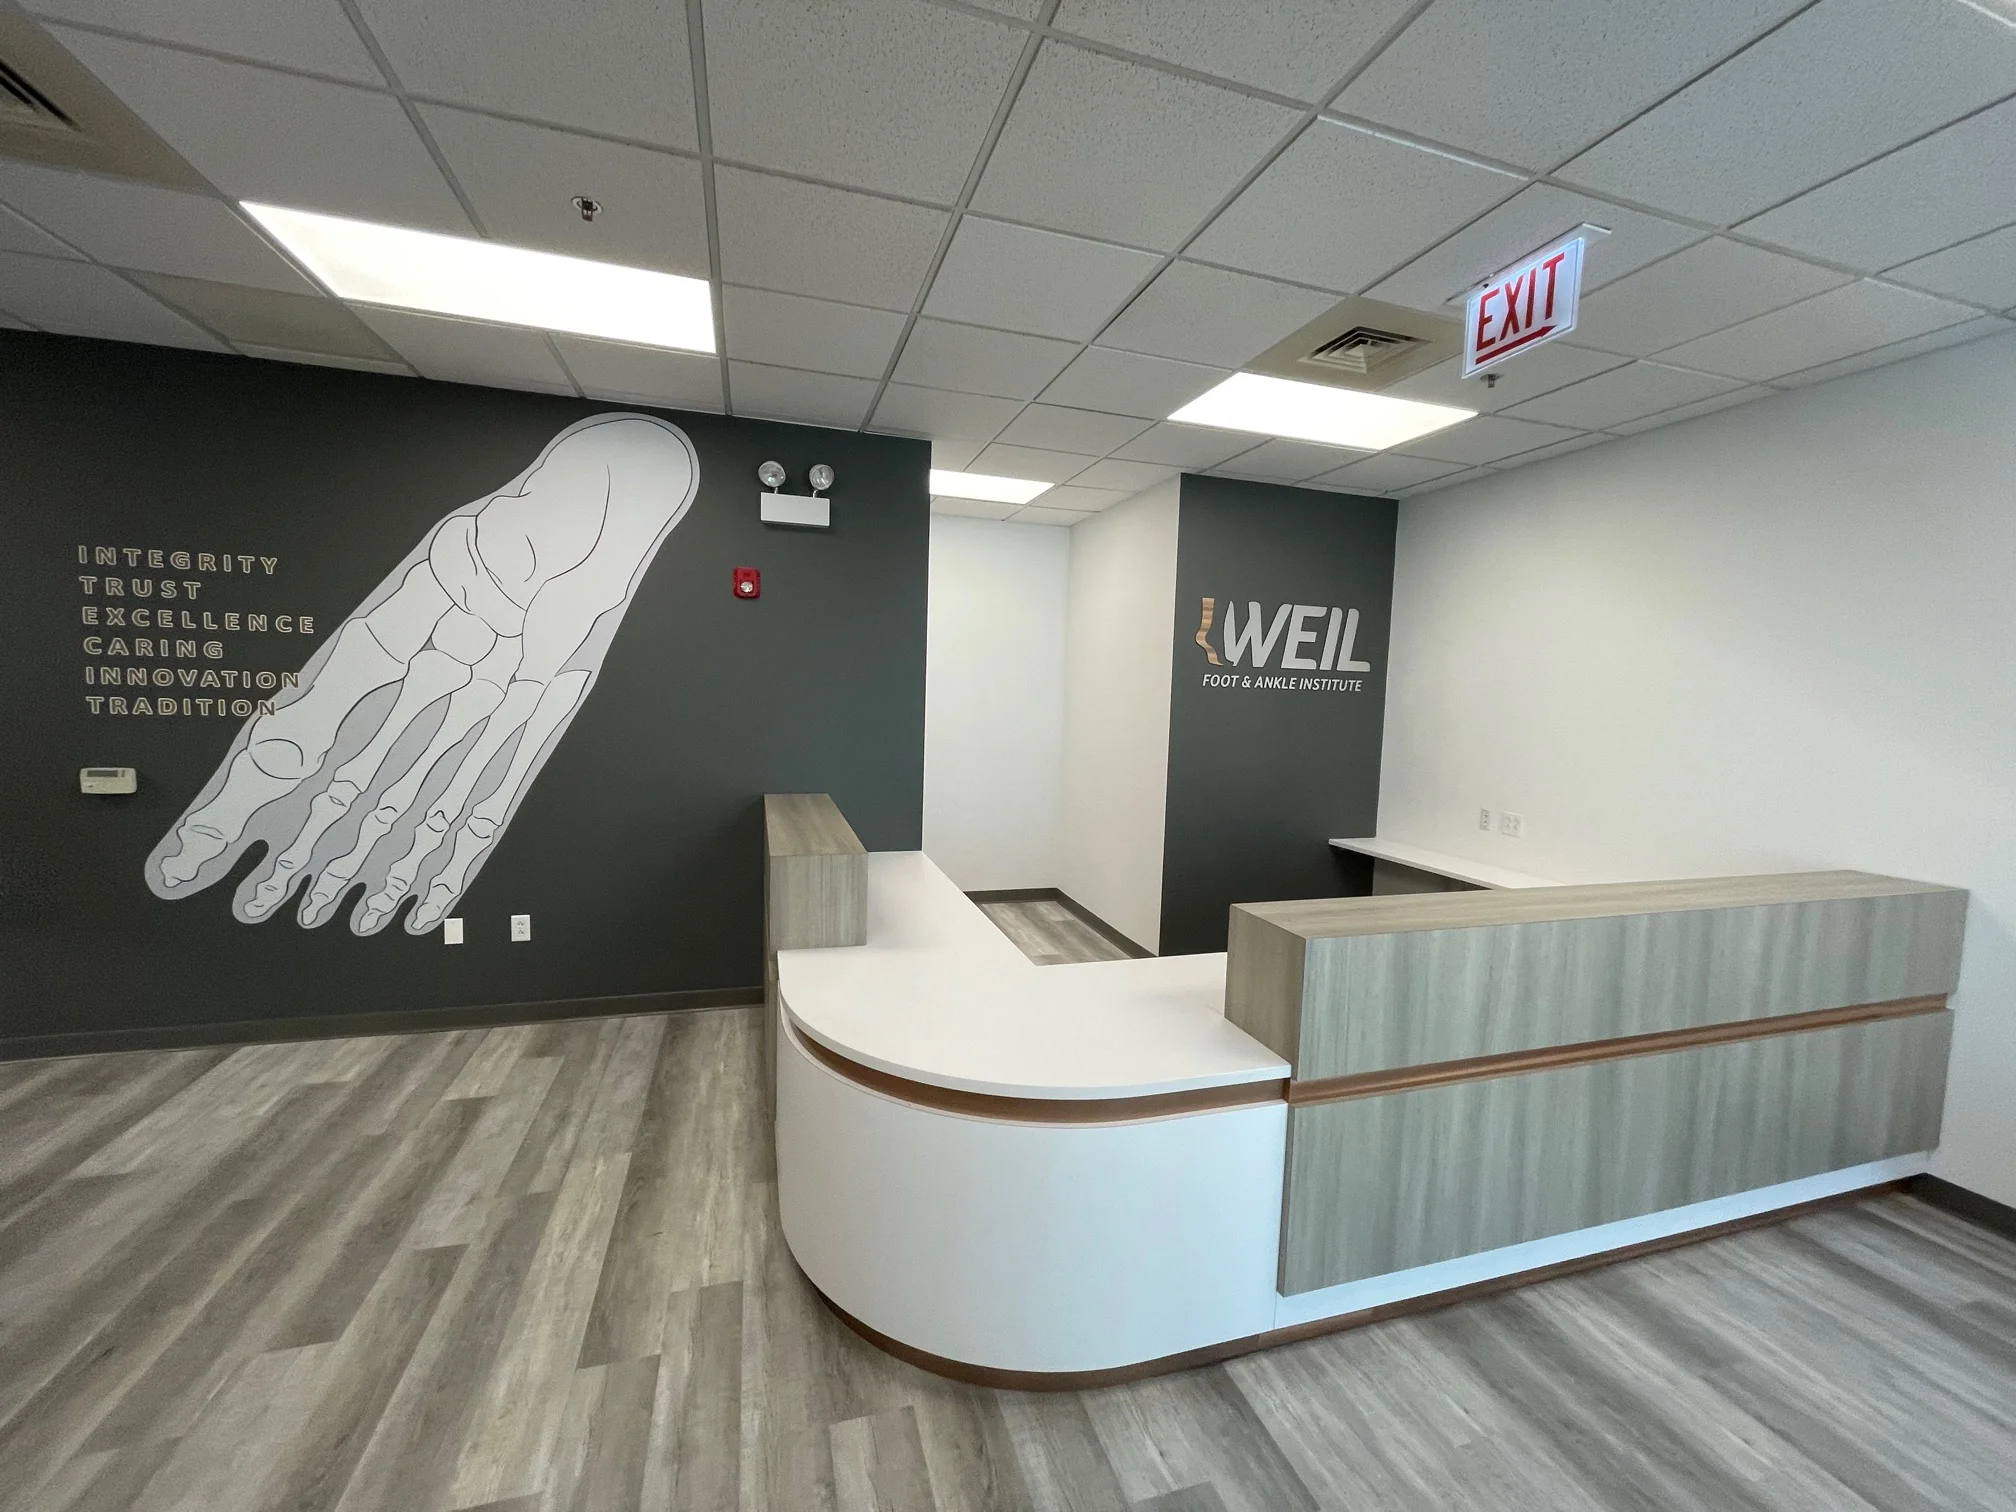 Weil Foot & Ankle Institute - Tinley Park, IL